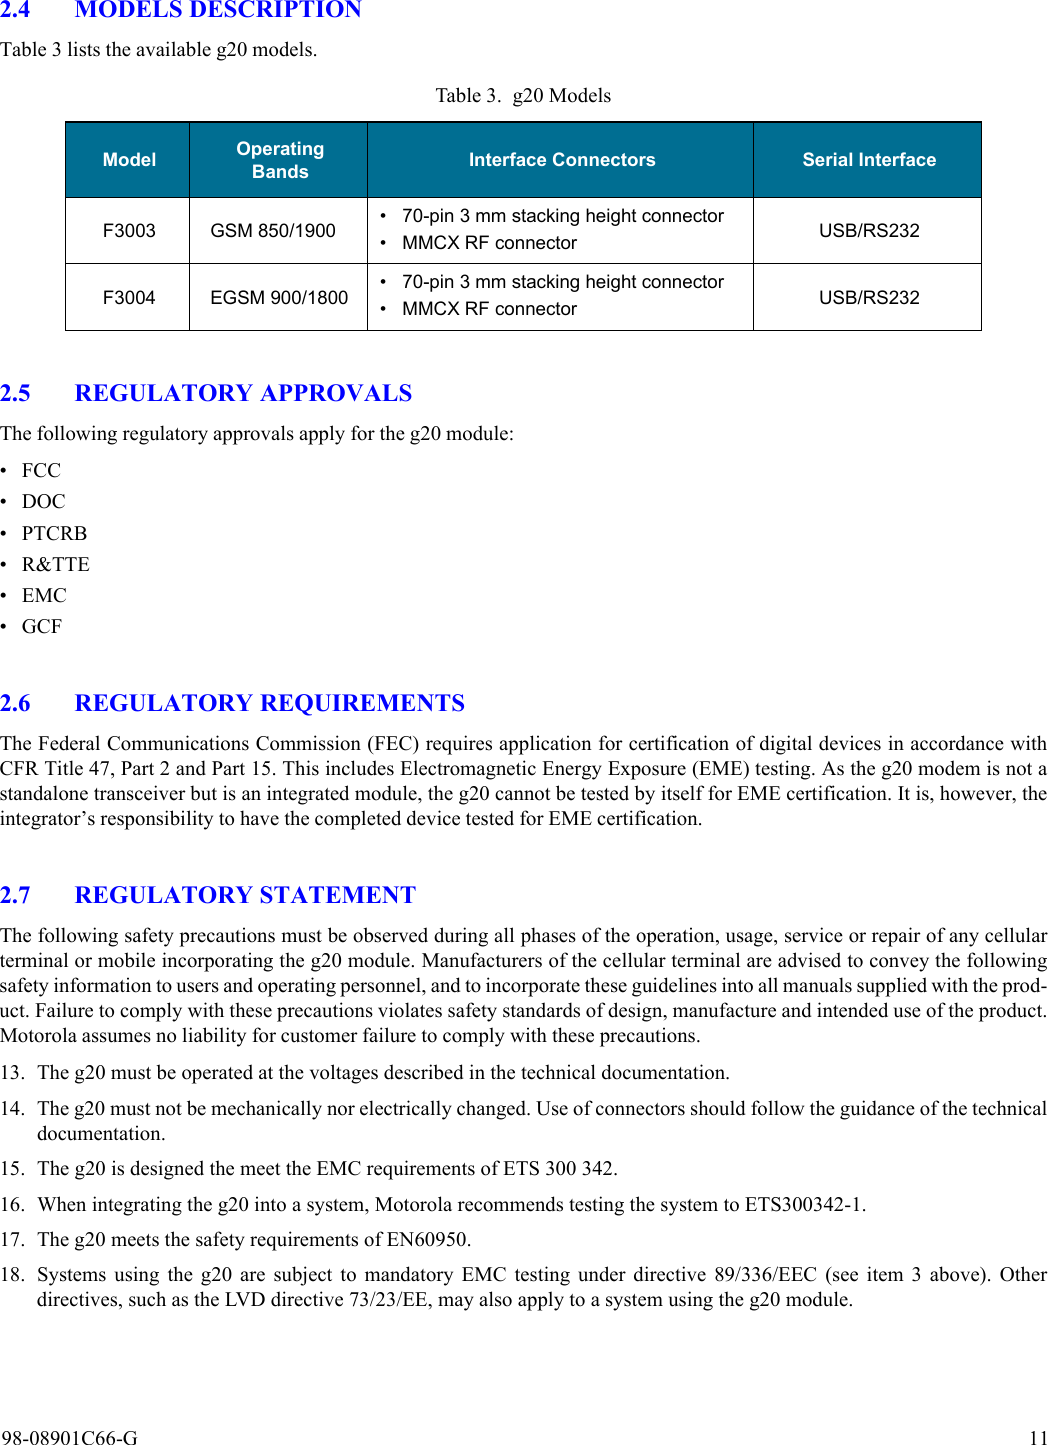 98-08901C66-G 112.4 MODELS DESCRIPTIONTable 3 lists the available g20 models.2.5 REGULATORY APPROVALSThe following regulatory approvals apply for the g20 module:•FCC• DOC• PTCRB•R&amp;TTE•EMC•GCF2.6 REGULATORY REQUIREMENTSThe Federal Communications Commission (FEC) requires application for certification of digital devices in accordance withCFR Title 47, Part 2 and Part 15. This includes Electromagnetic Energy Exposure (EME) testing. As the g20 modem is not astandalone transceiver but is an integrated module, the g20 cannot be tested by itself for EME certification. It is, however, theintegrator’s responsibility to have the completed device tested for EME certification.2.7 REGULATORY STATEMENTThe following safety precautions must be observed during all phases of the operation, usage, service or repair of any cellularterminal or mobile incorporating the g20 module. Manufacturers of the cellular terminal are advised to convey the followingsafety information to users and operating personnel, and to incorporate these guidelines into all manuals supplied with the prod-uct. Failure to comply with these precautions violates safety standards of design, manufacture and intended use of the product.Motorola assumes no liability for customer failure to comply with these precautions.13. The g20 must be operated at the voltages described in the technical documentation.14. The g20 must not be mechanically nor electrically changed. Use of connectors should follow the guidance of the technicaldocumentation.15. The g20 is designed the meet the EMC requirements of ETS 300 342.16. When integrating the g20 into a system, Motorola recommends testing the system to ETS300342-1.17. The g20 meets the safety requirements of EN60950.18. Systems using the g20 are subject to mandatory EMC testing under directive 89/336/EEC (see item 3 above). Otherdirectives, such as the LVD directive 73/23/EE, may also apply to a system using the g20 module.Table 3. g20 ModelsModel Operating Bands Interface Connectors Serial InterfaceF3003 GSM 850/1900 • 70-pin 3 mm stacking height connector• MMCX RF connector USB/RS232F3004 EGSM 900/1800 • 70-pin 3 mm stacking height connector• MMCX RF connector USB/RS232